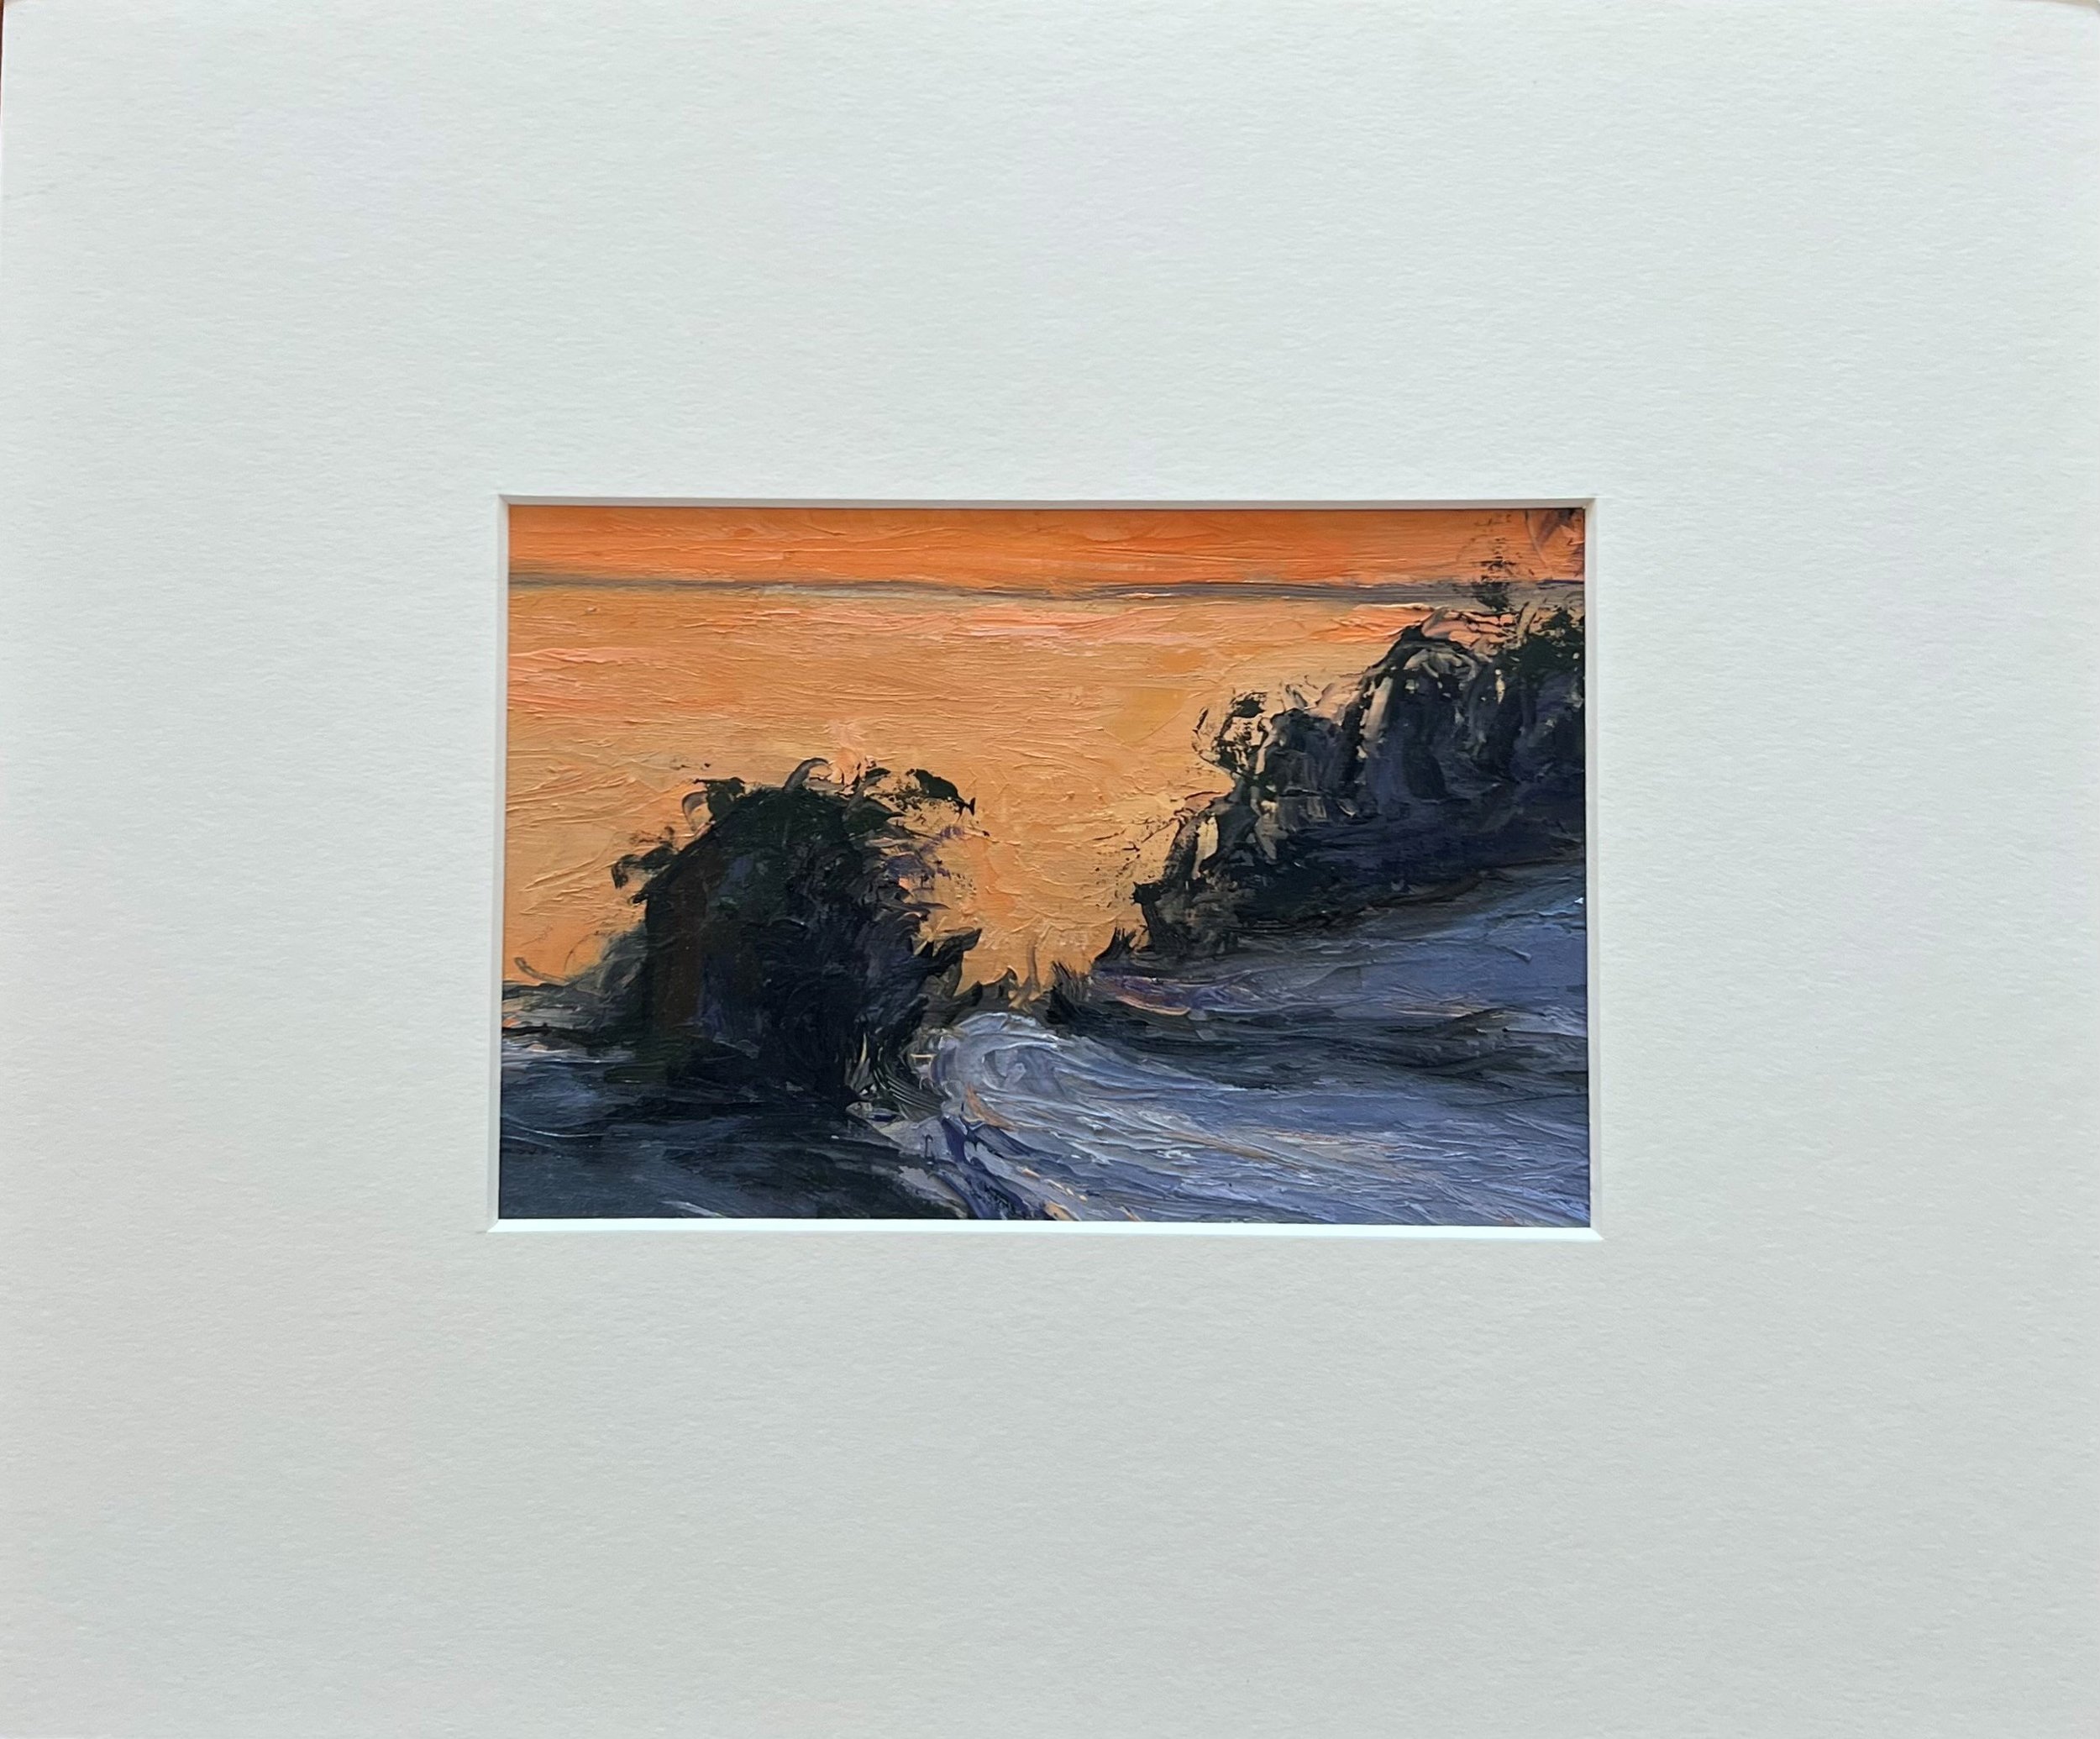 2022-01   Down the Grass Path to Winter Sunset   Oil on Gesso  Paper   12x14 inch mat   Window cut to 5x7 inches  Guilford, CT.jpg